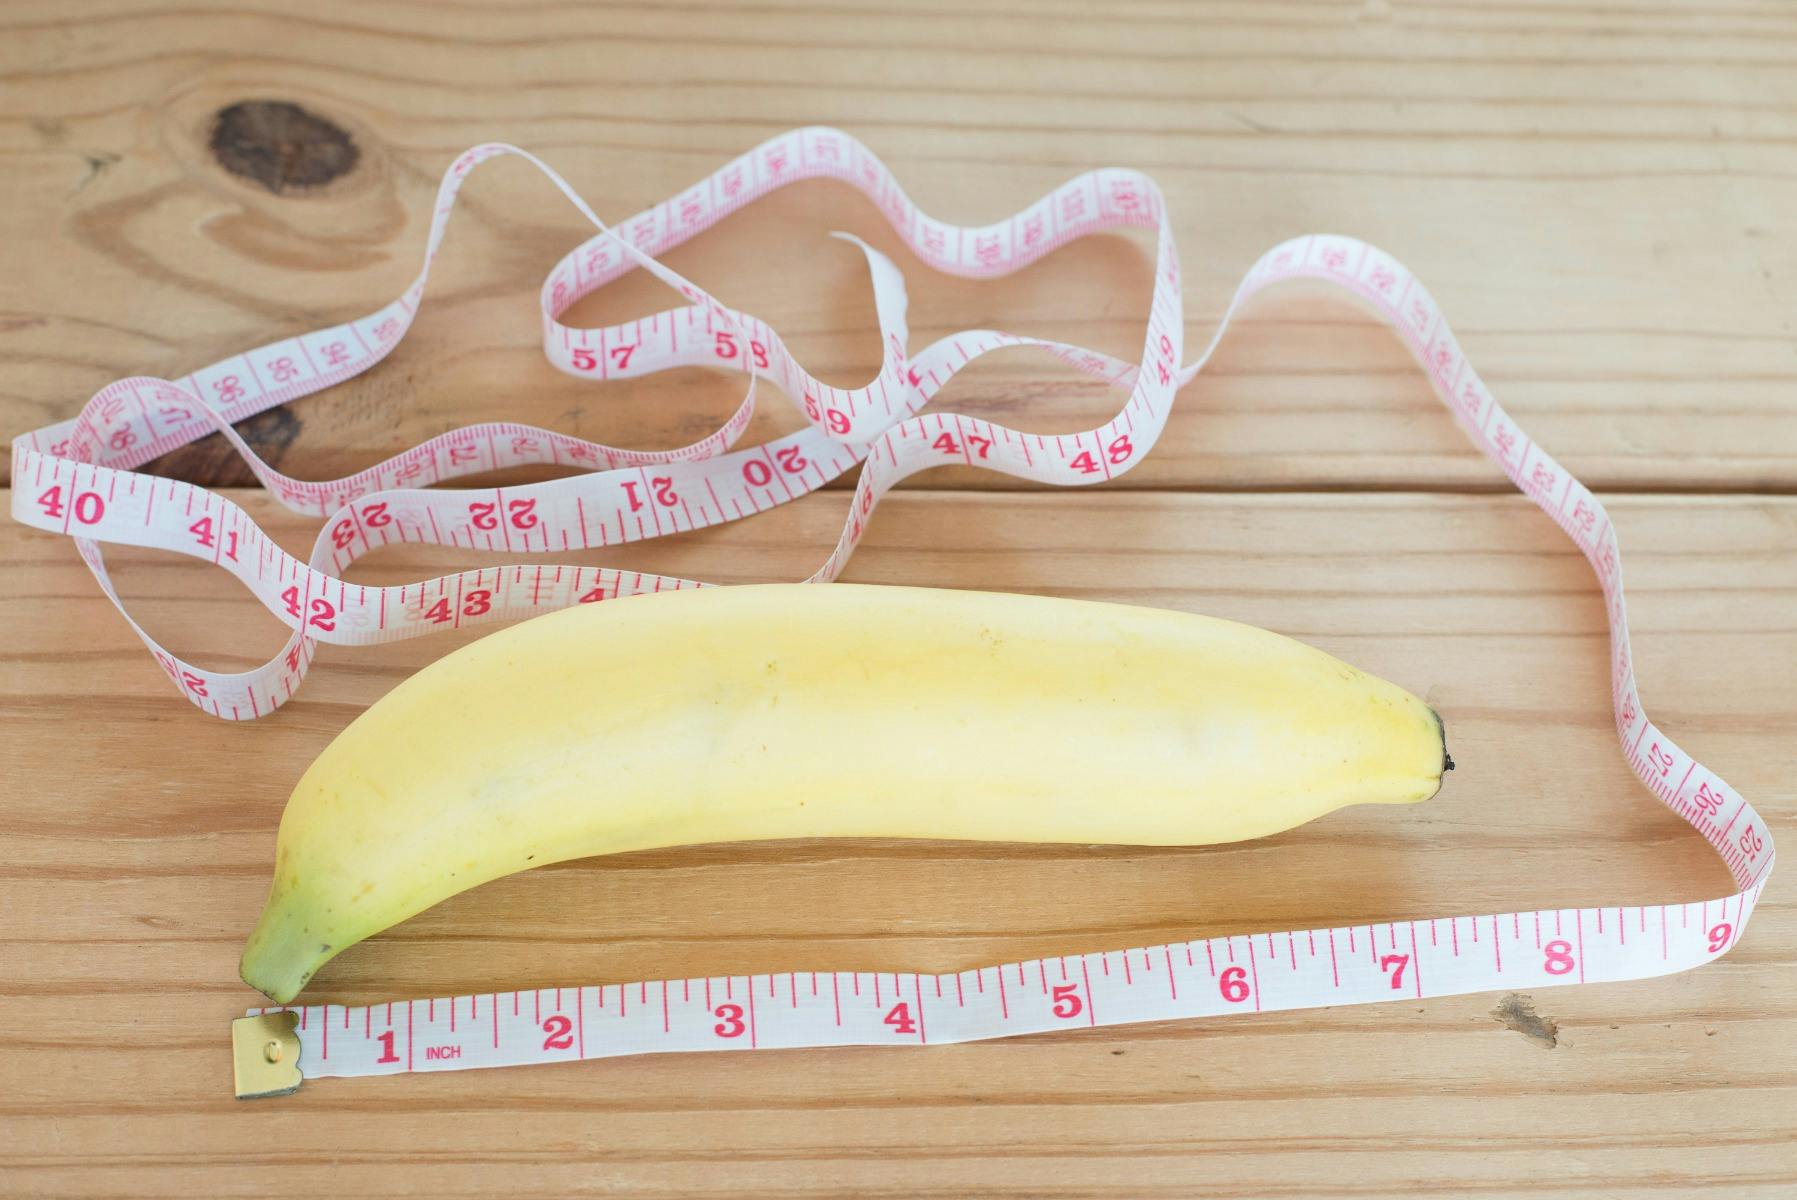 A banana with a tape measure around it to represent a penis